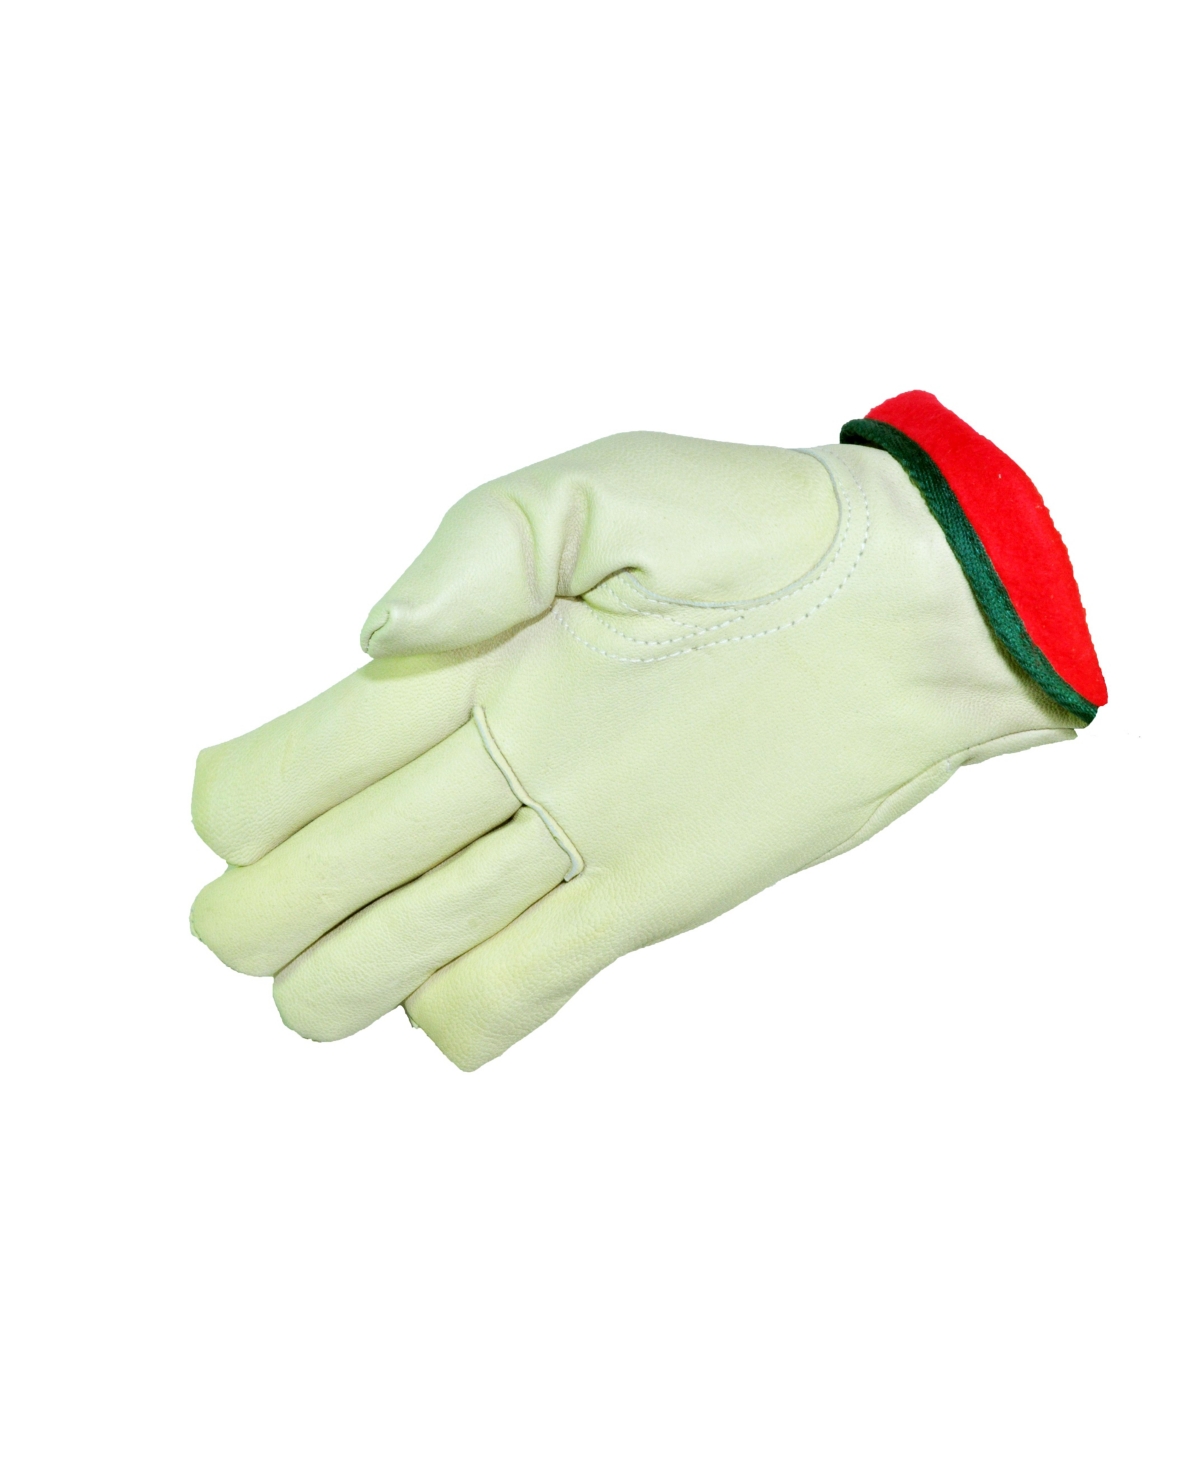 6013 Driving and Work Gloves w/ Fleece Lining, 3 Pairs - Natural